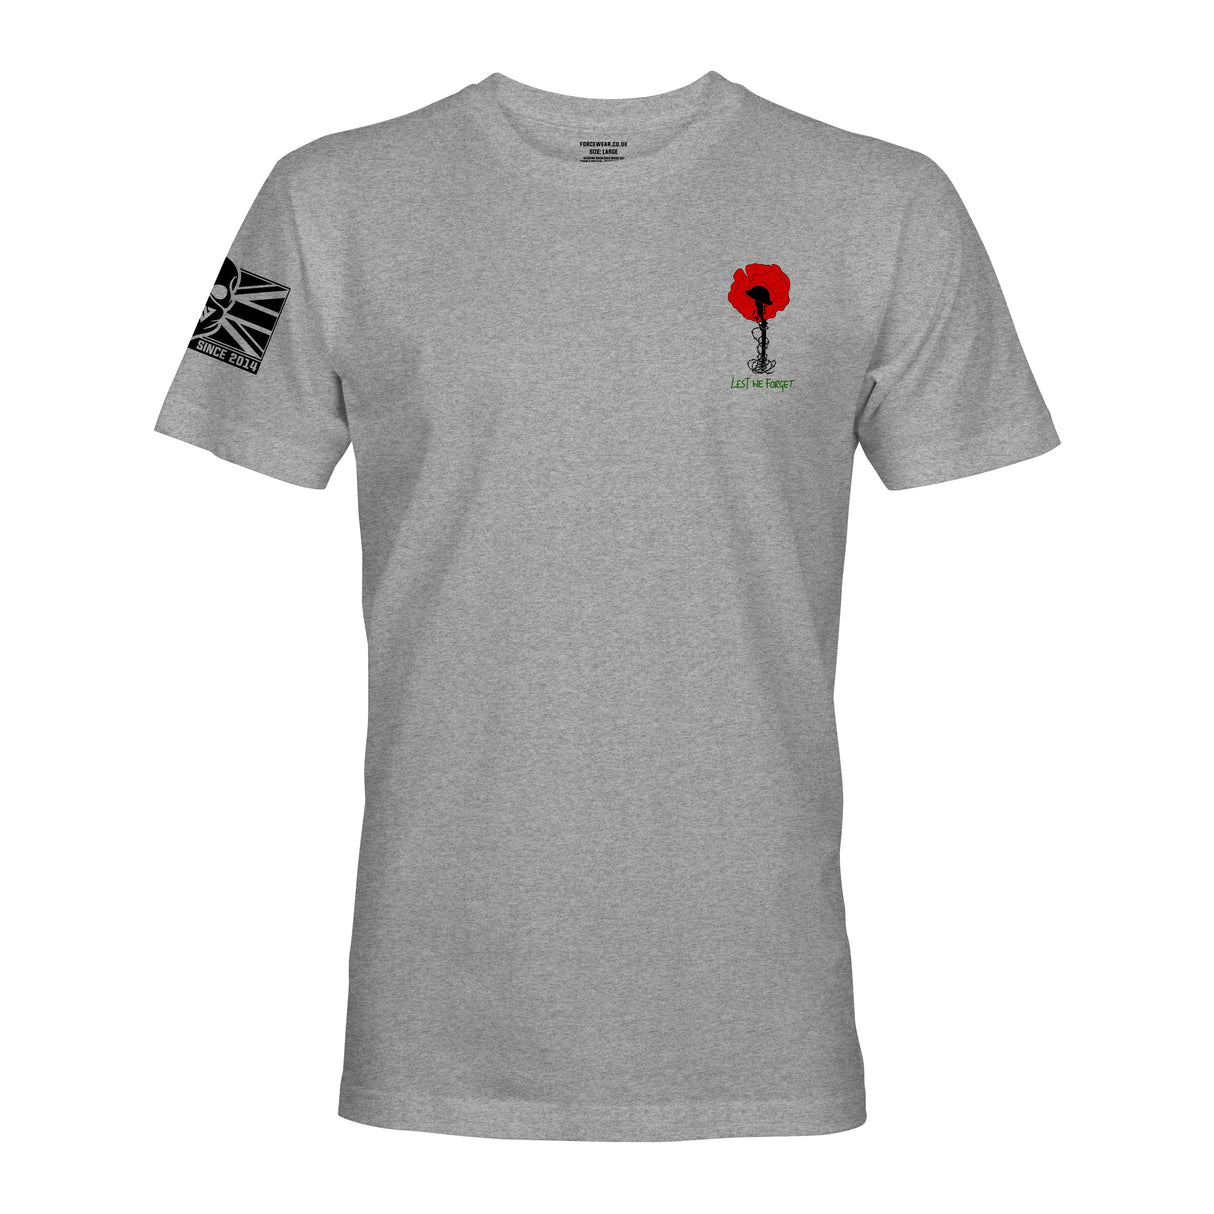 LEST WE FORGET MEMORIAL T-SHIRT - Force Wear HQ - T-SHIRTS